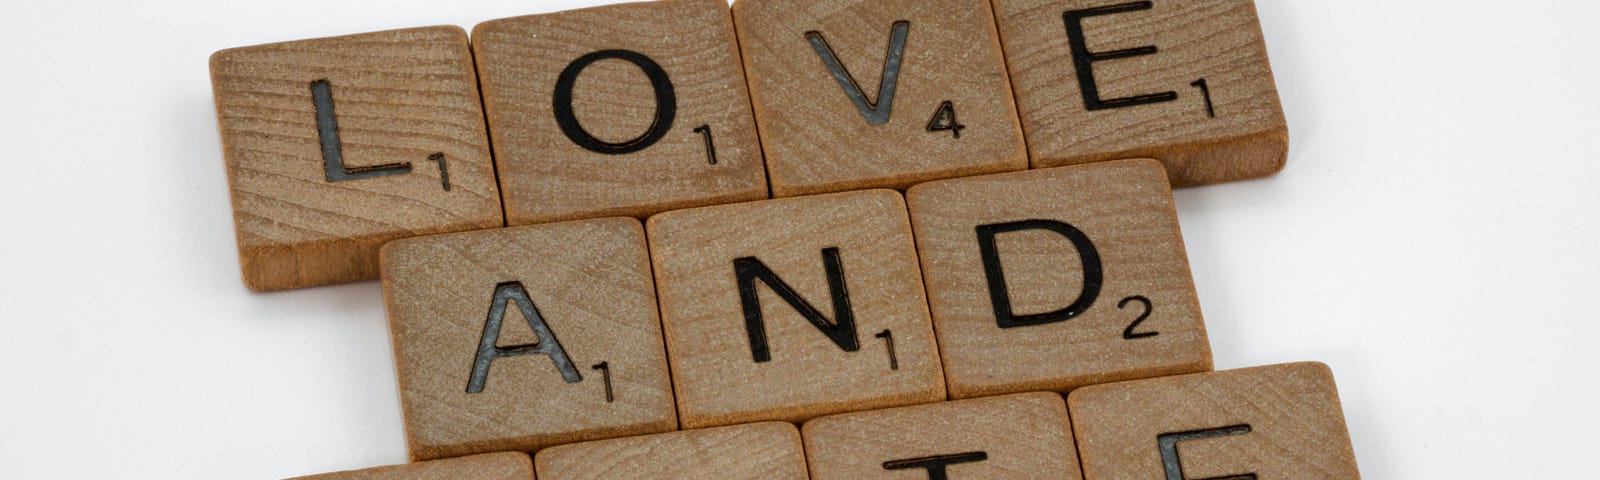 The words “Love and Hate” are spelled out using Scrabble tiles.